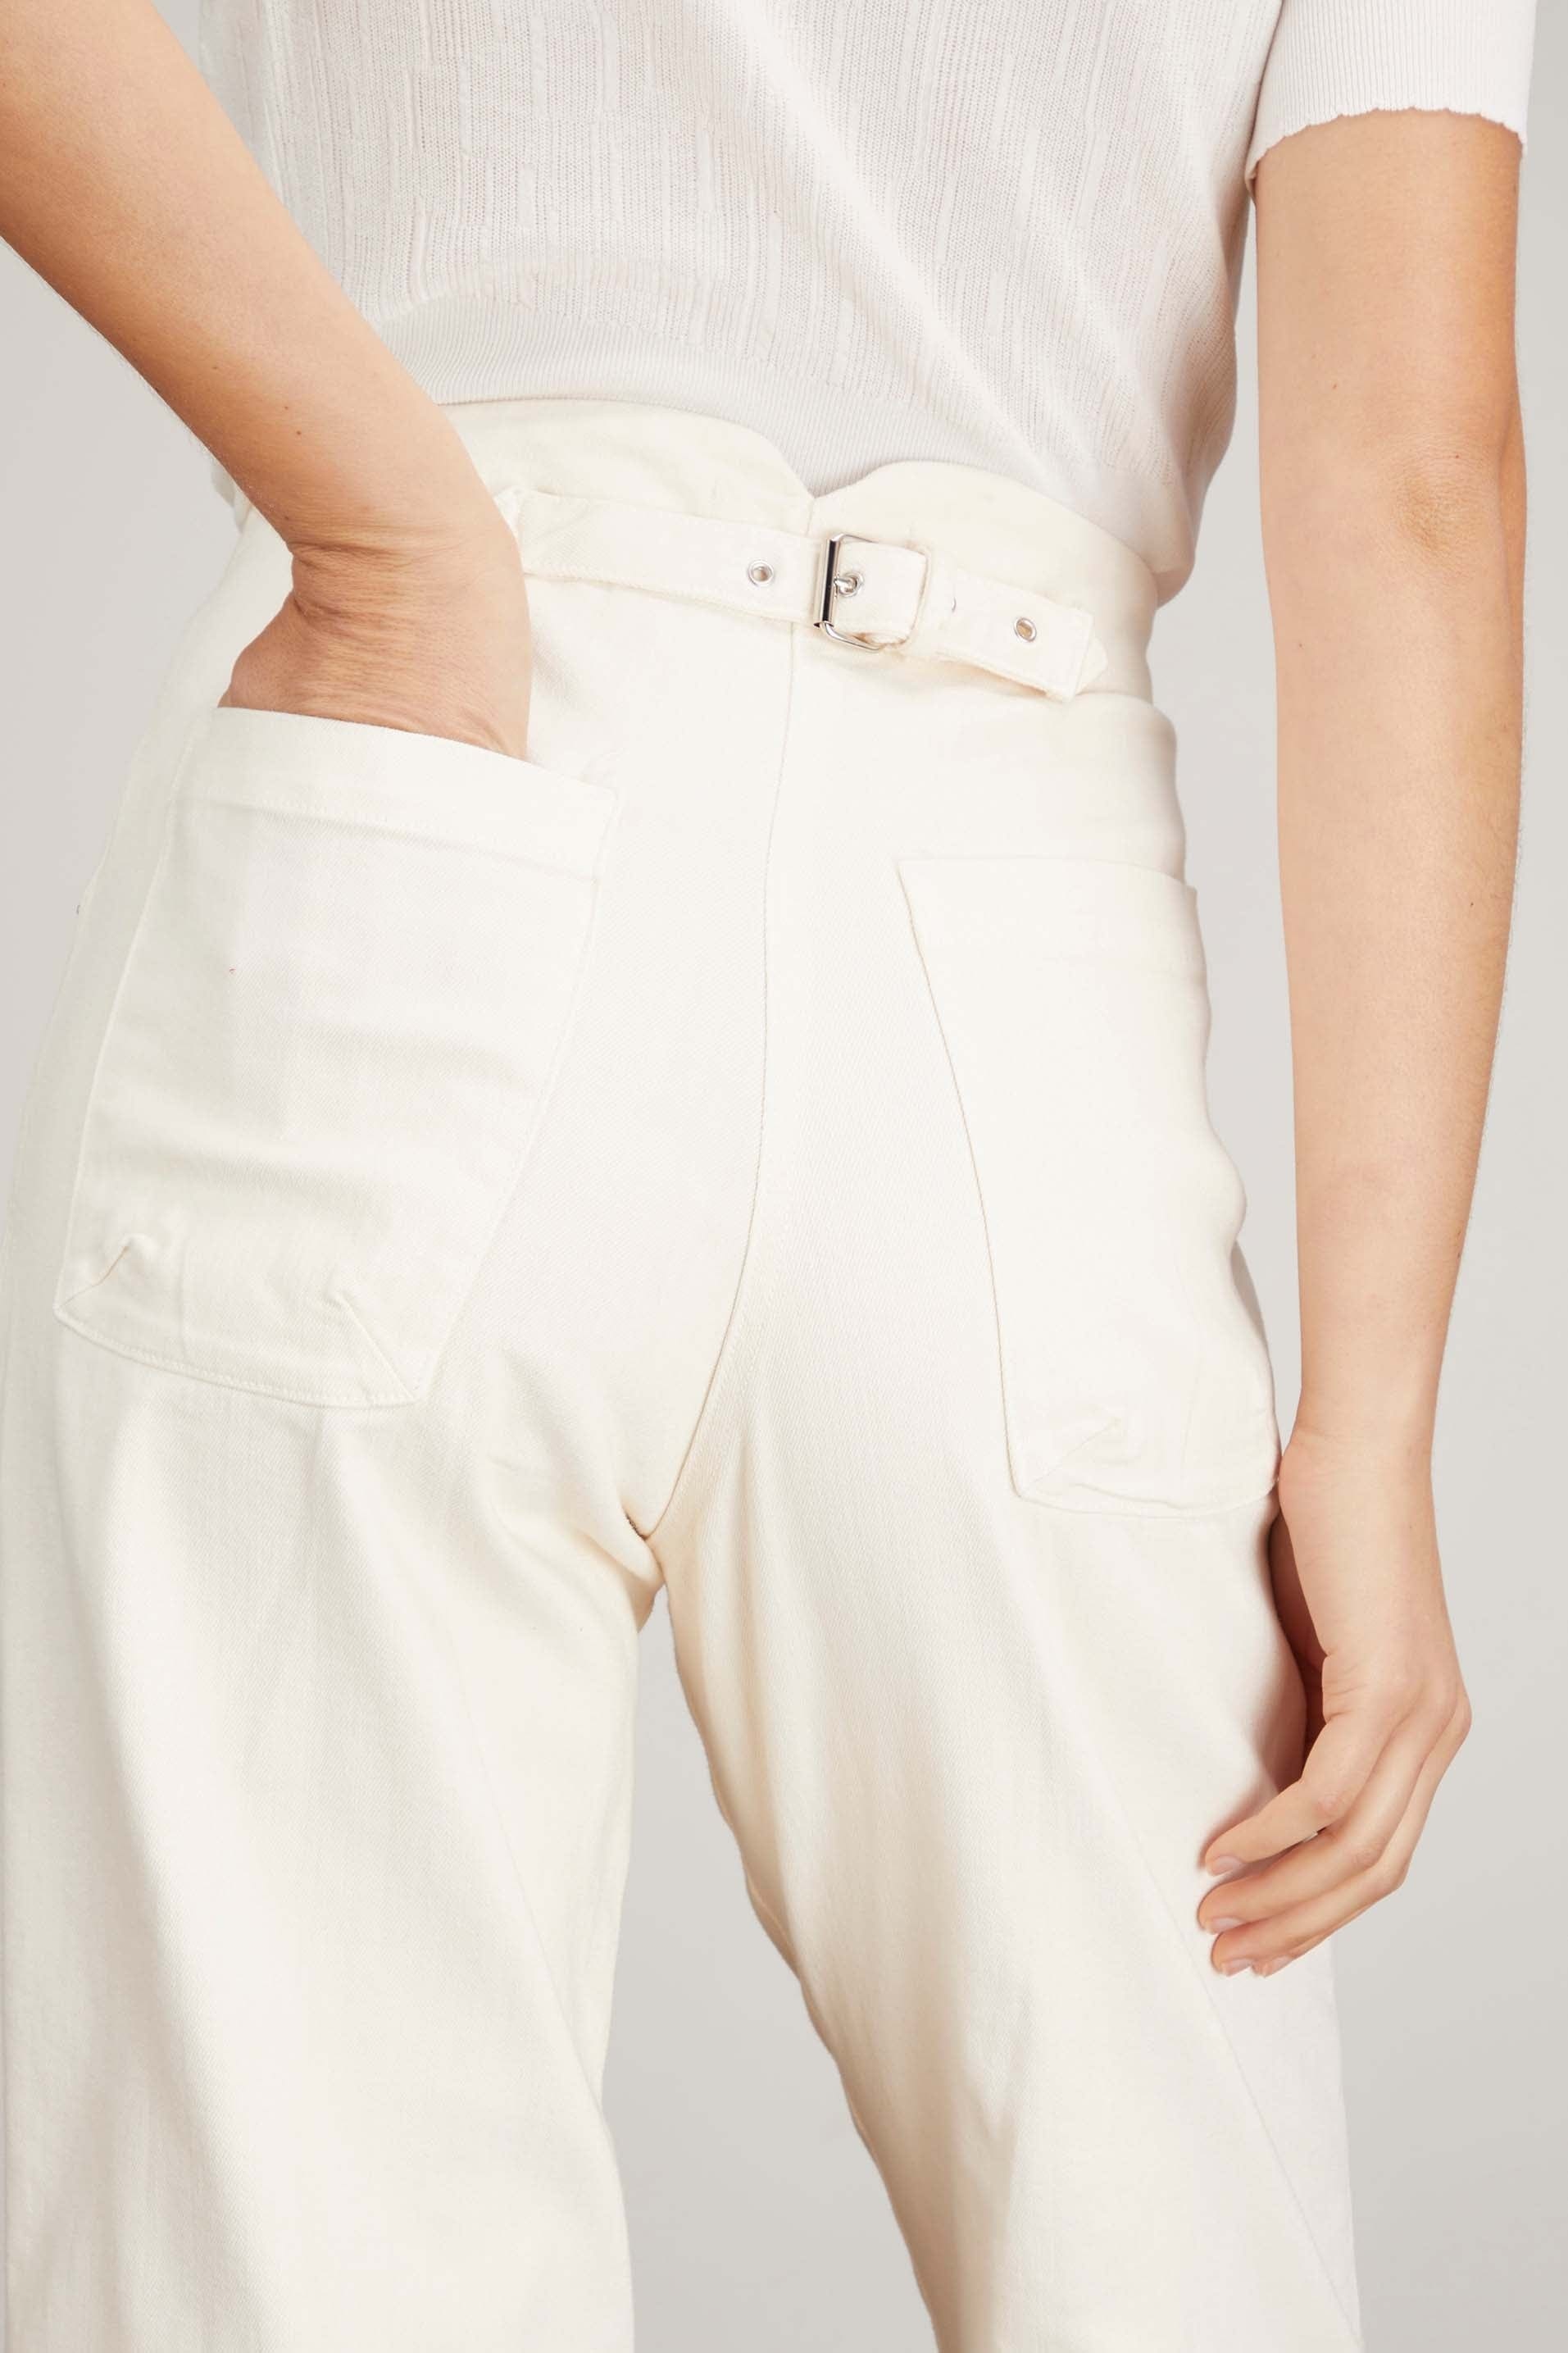 Wilkes Pant in Dirty White - 5